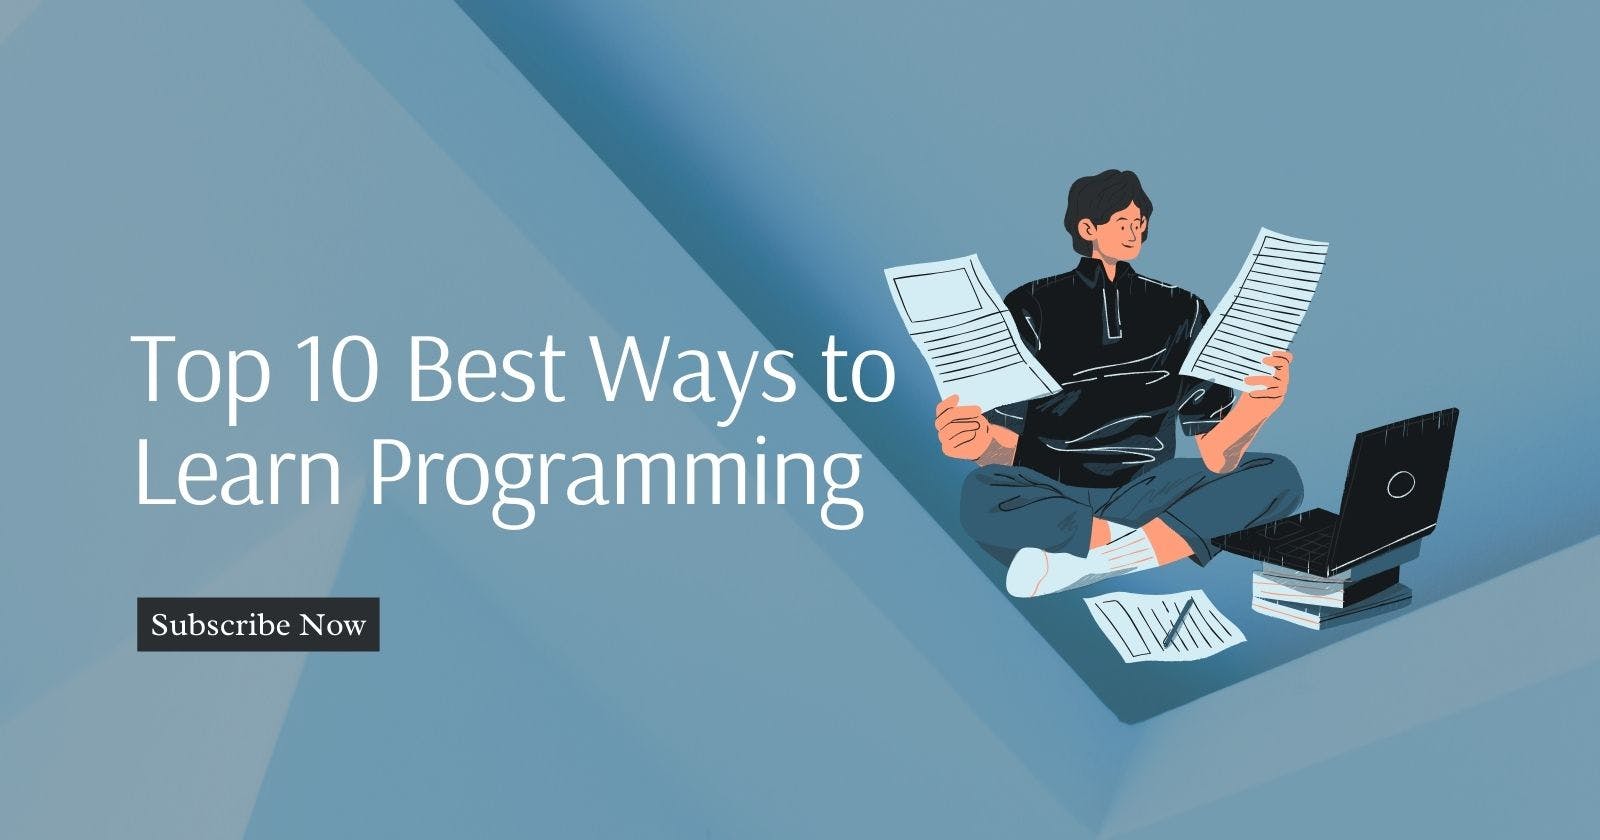 Top 10 Best Ways to Learn Programming